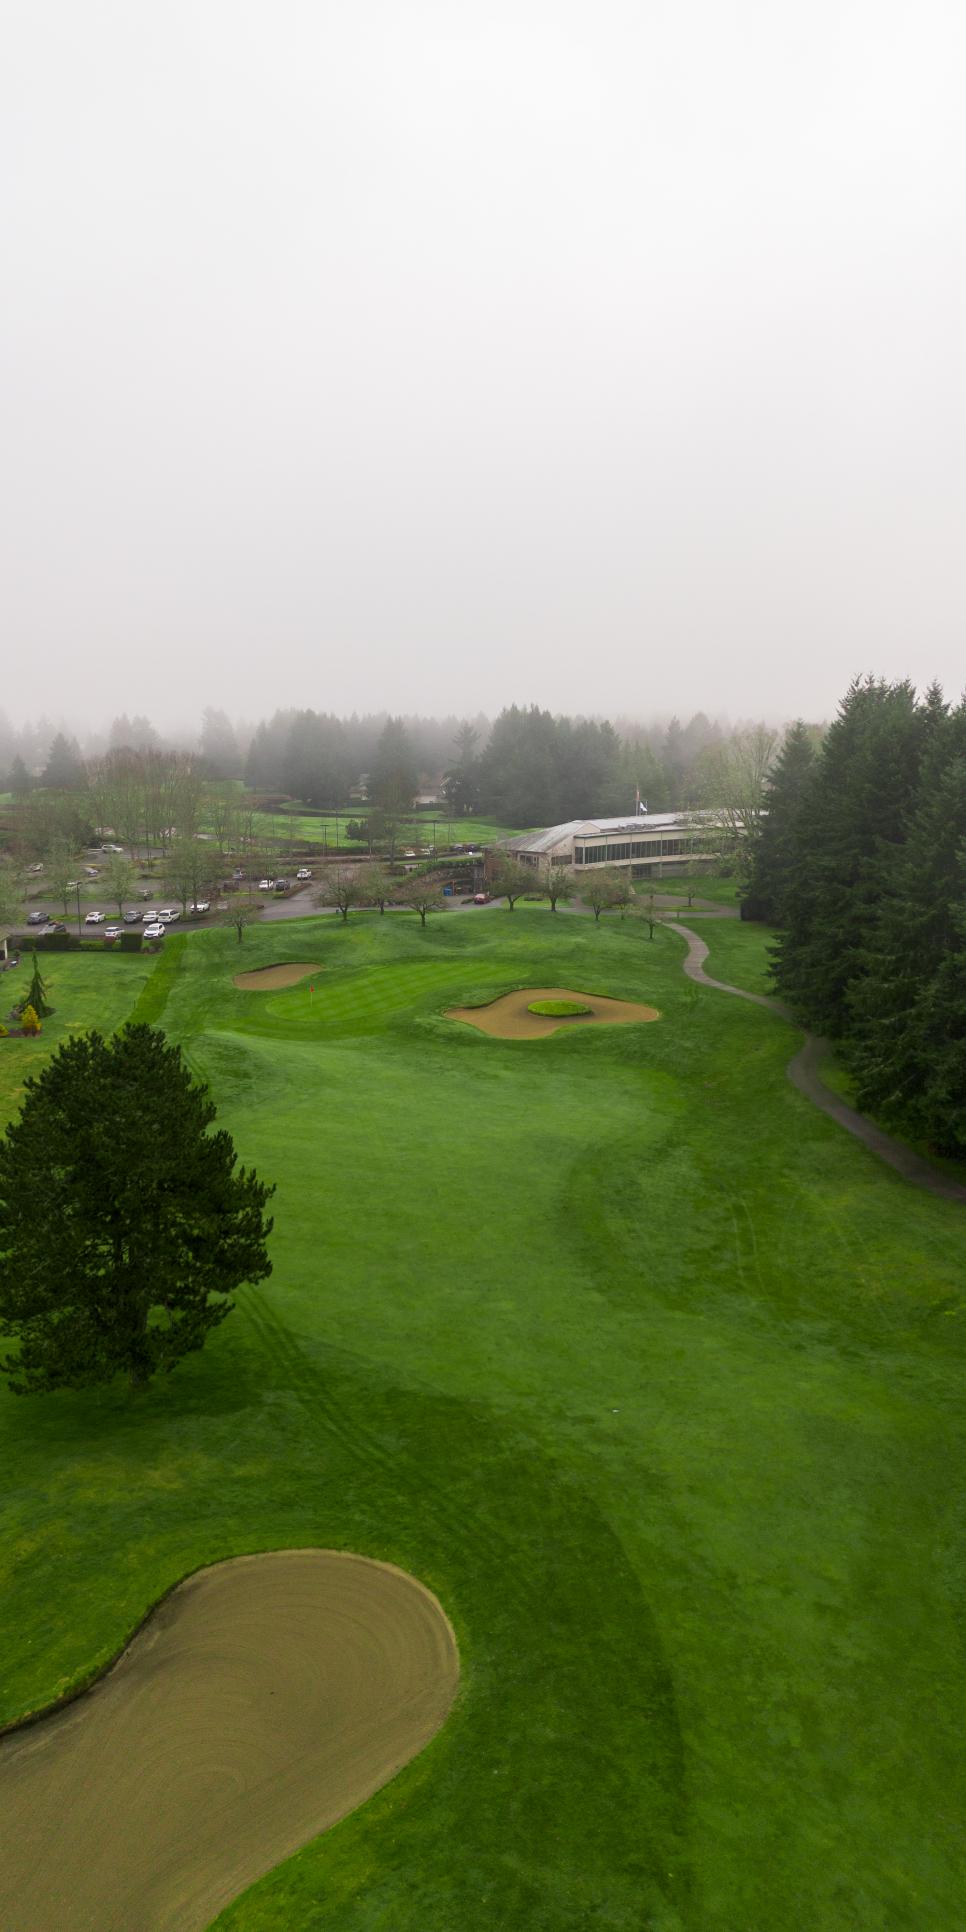 /content/dam/images/golfdigest/fullset/course-photos-for-places-to-play/Indian_Summer_Aerial_16027.jpg